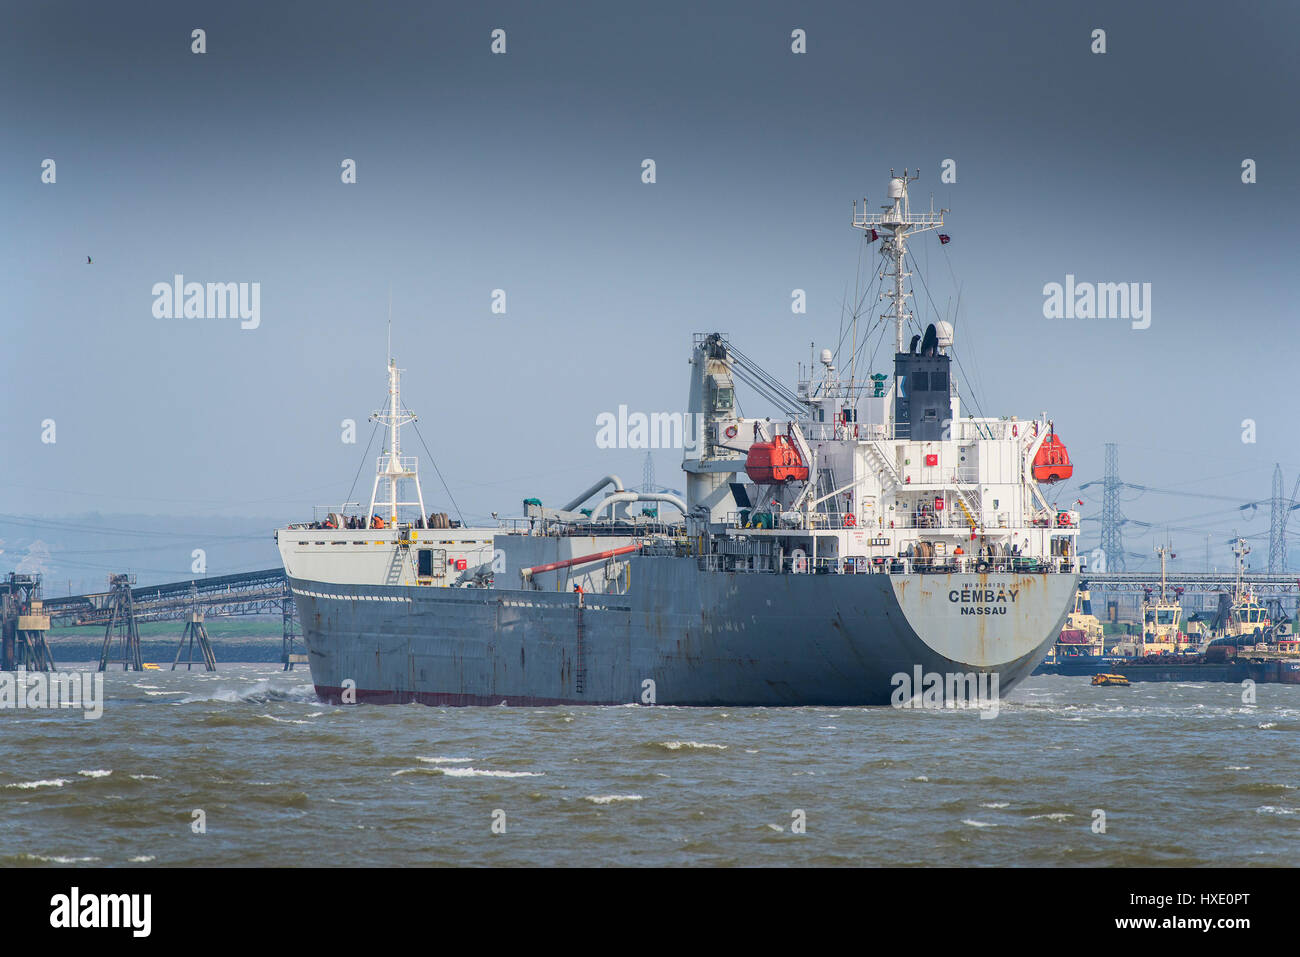 The large cement carrier Cembay steaming downriver on the River Thames in the UK. Stock Photo